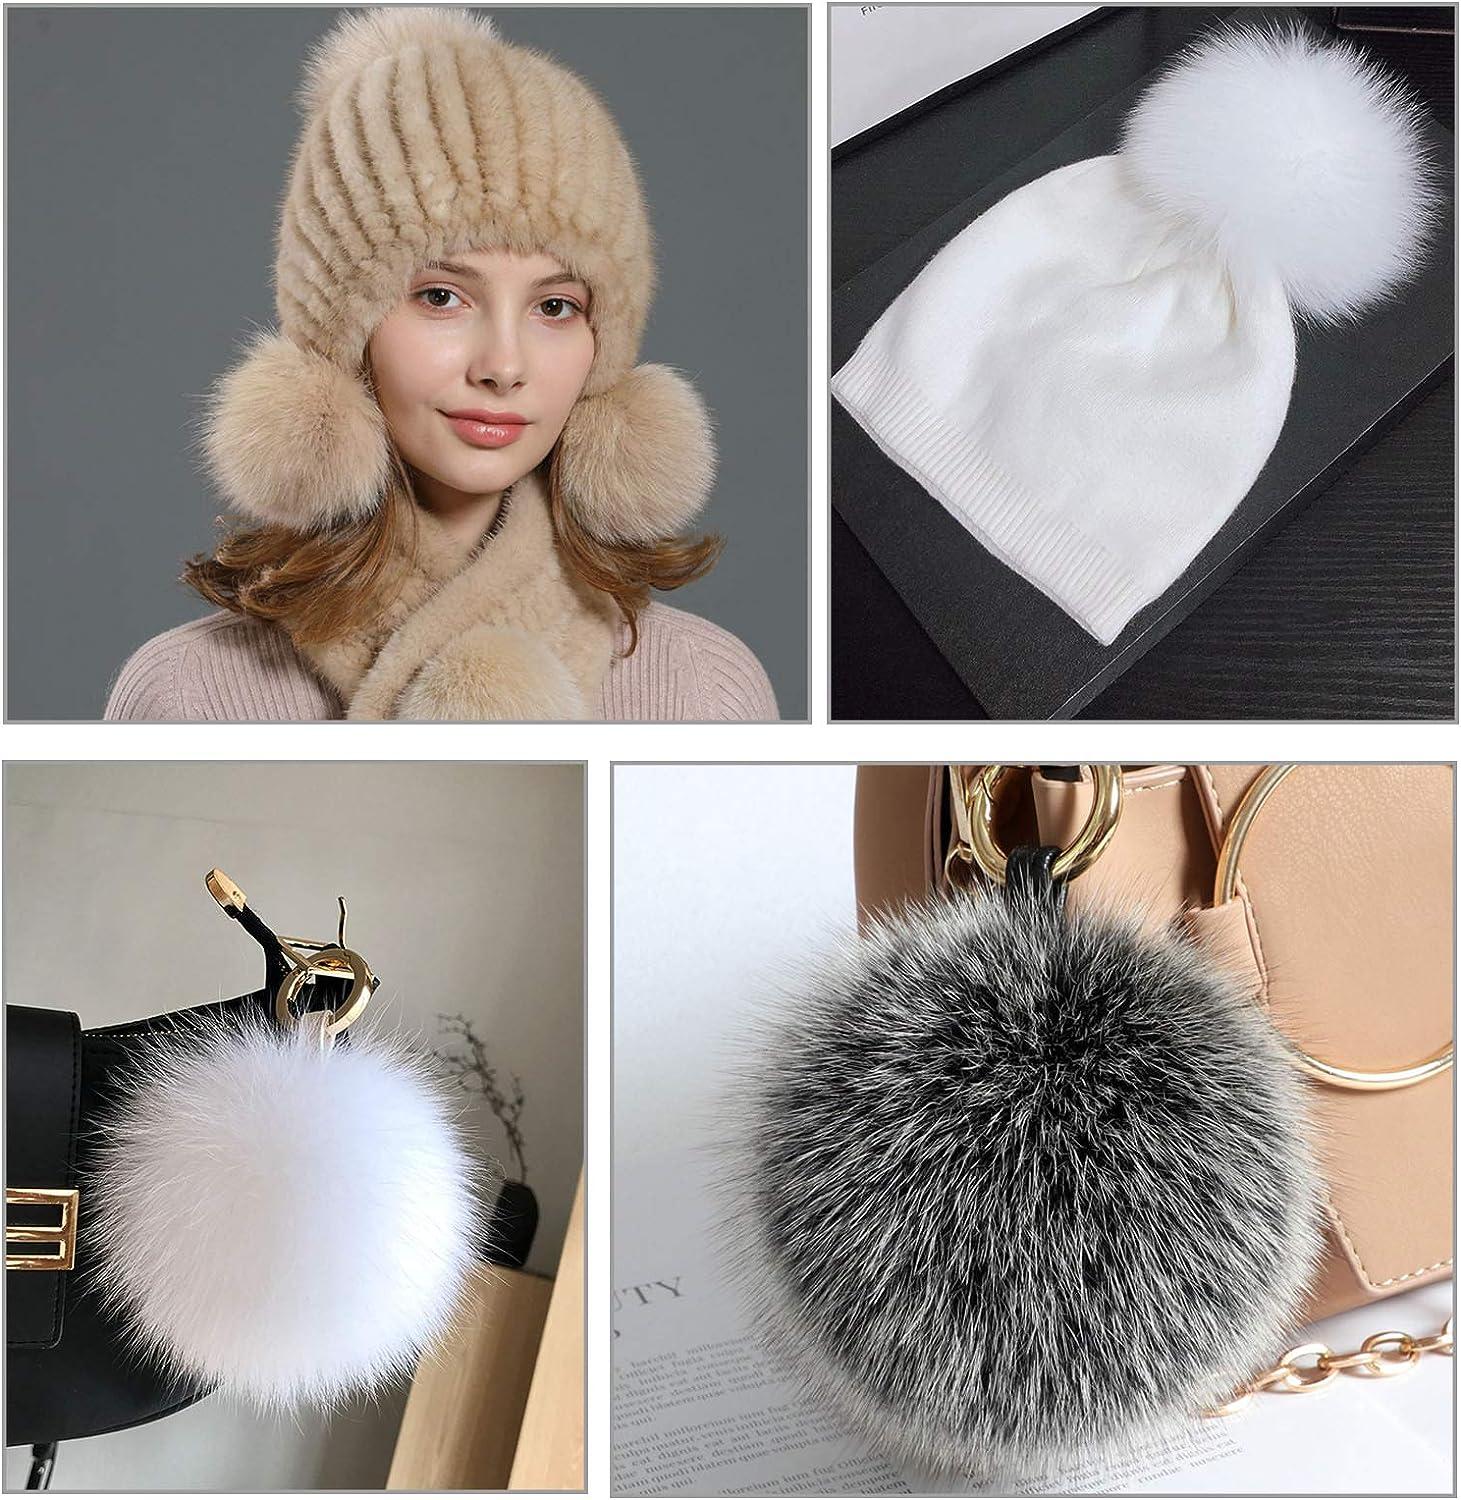 How to Make Faux Fur Pom Poms for Hats 